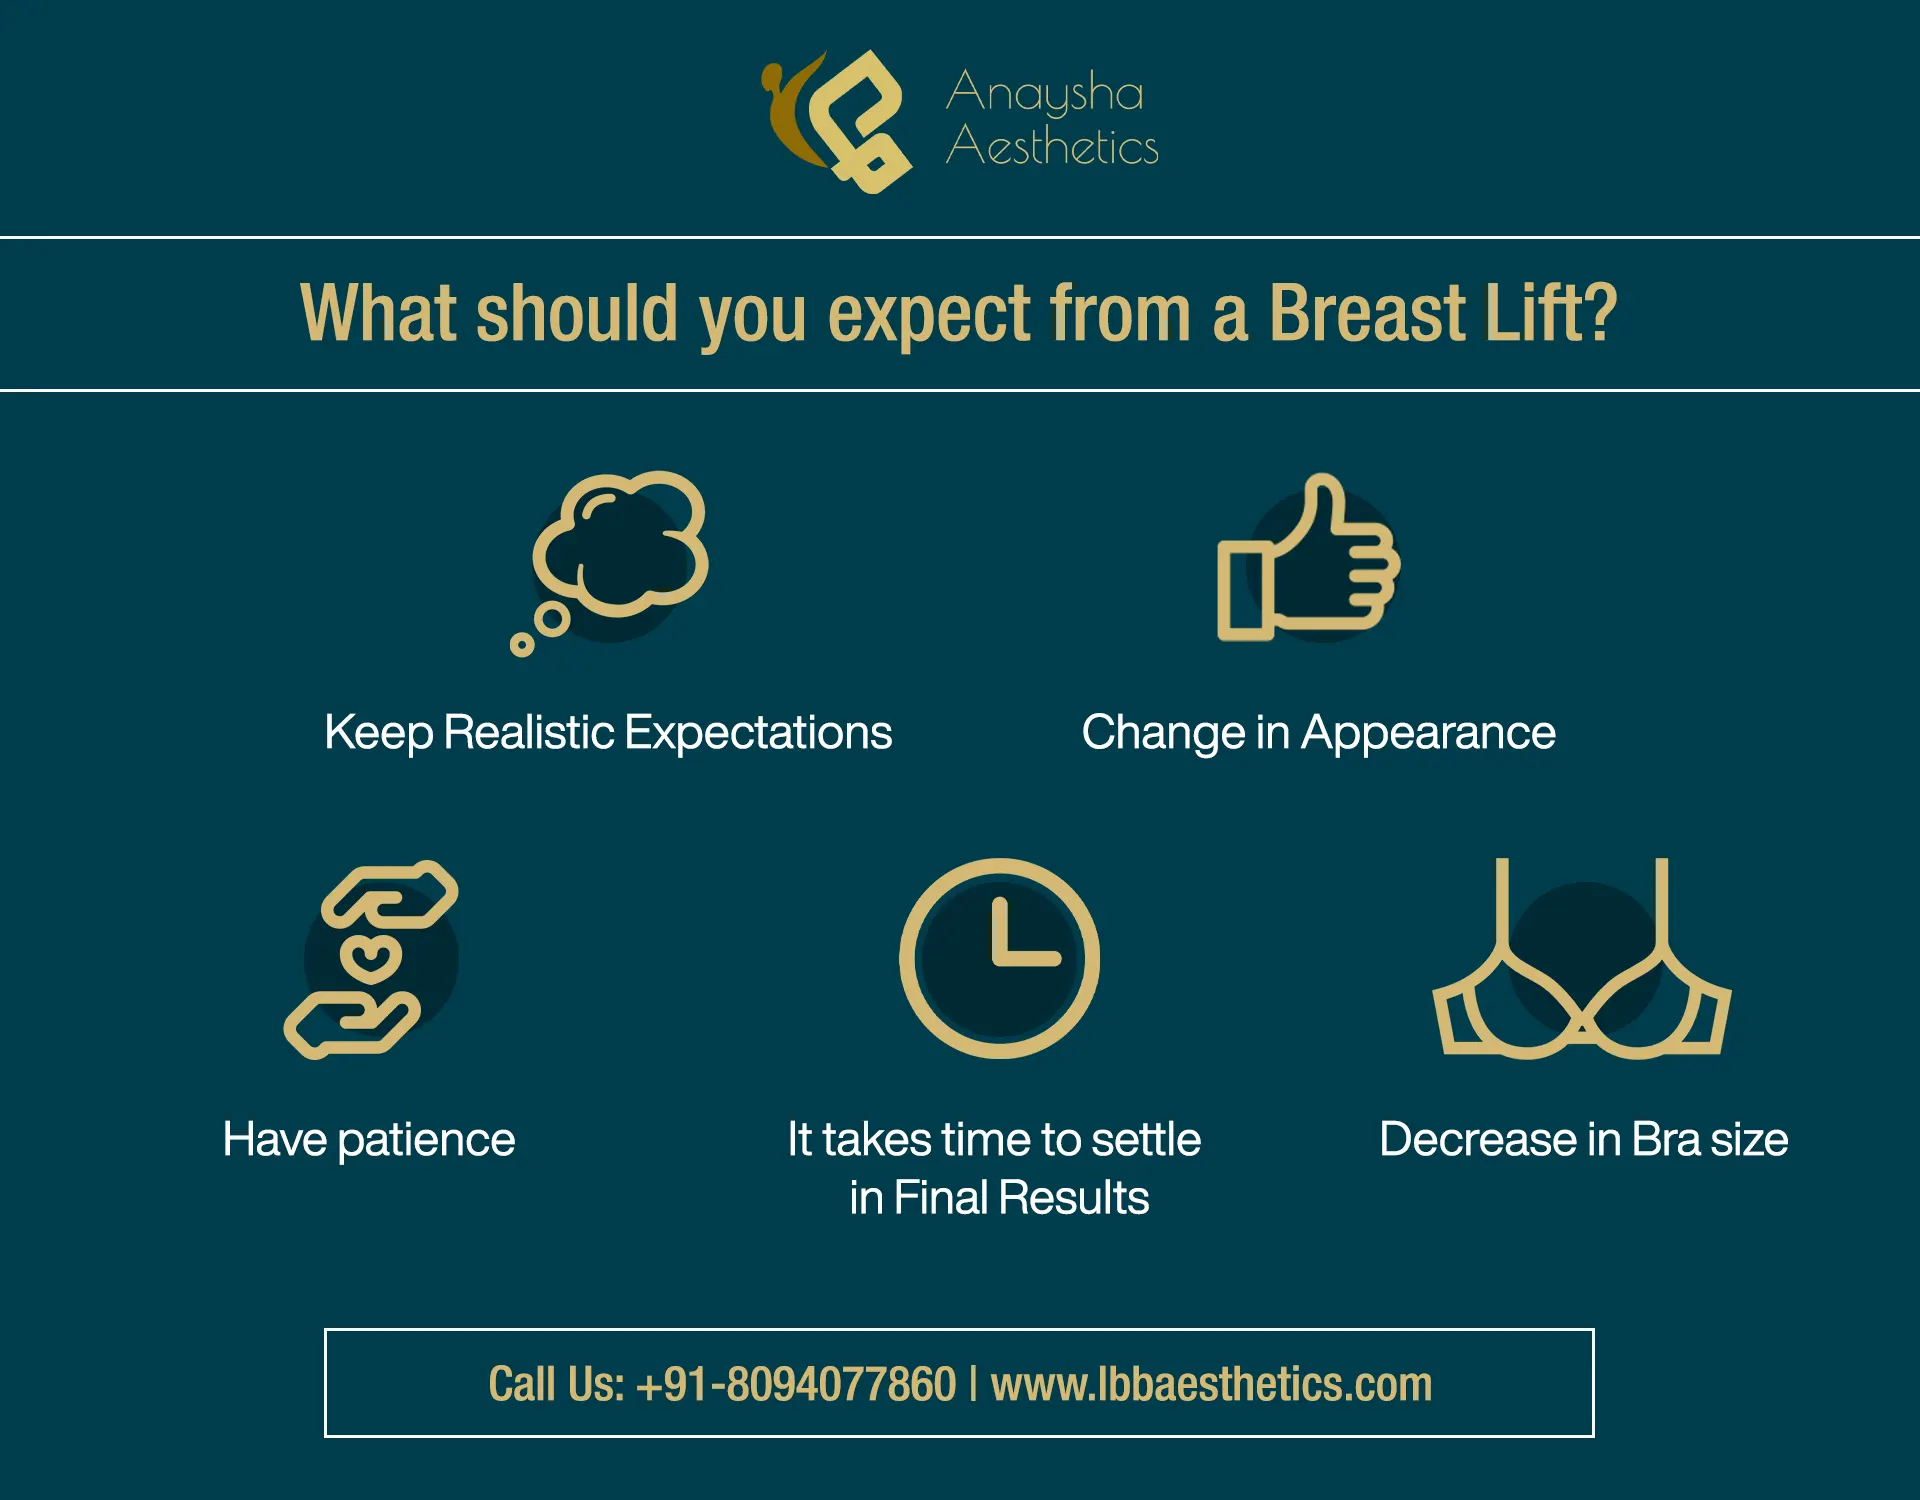 one-should-get-a-breast-lift-because